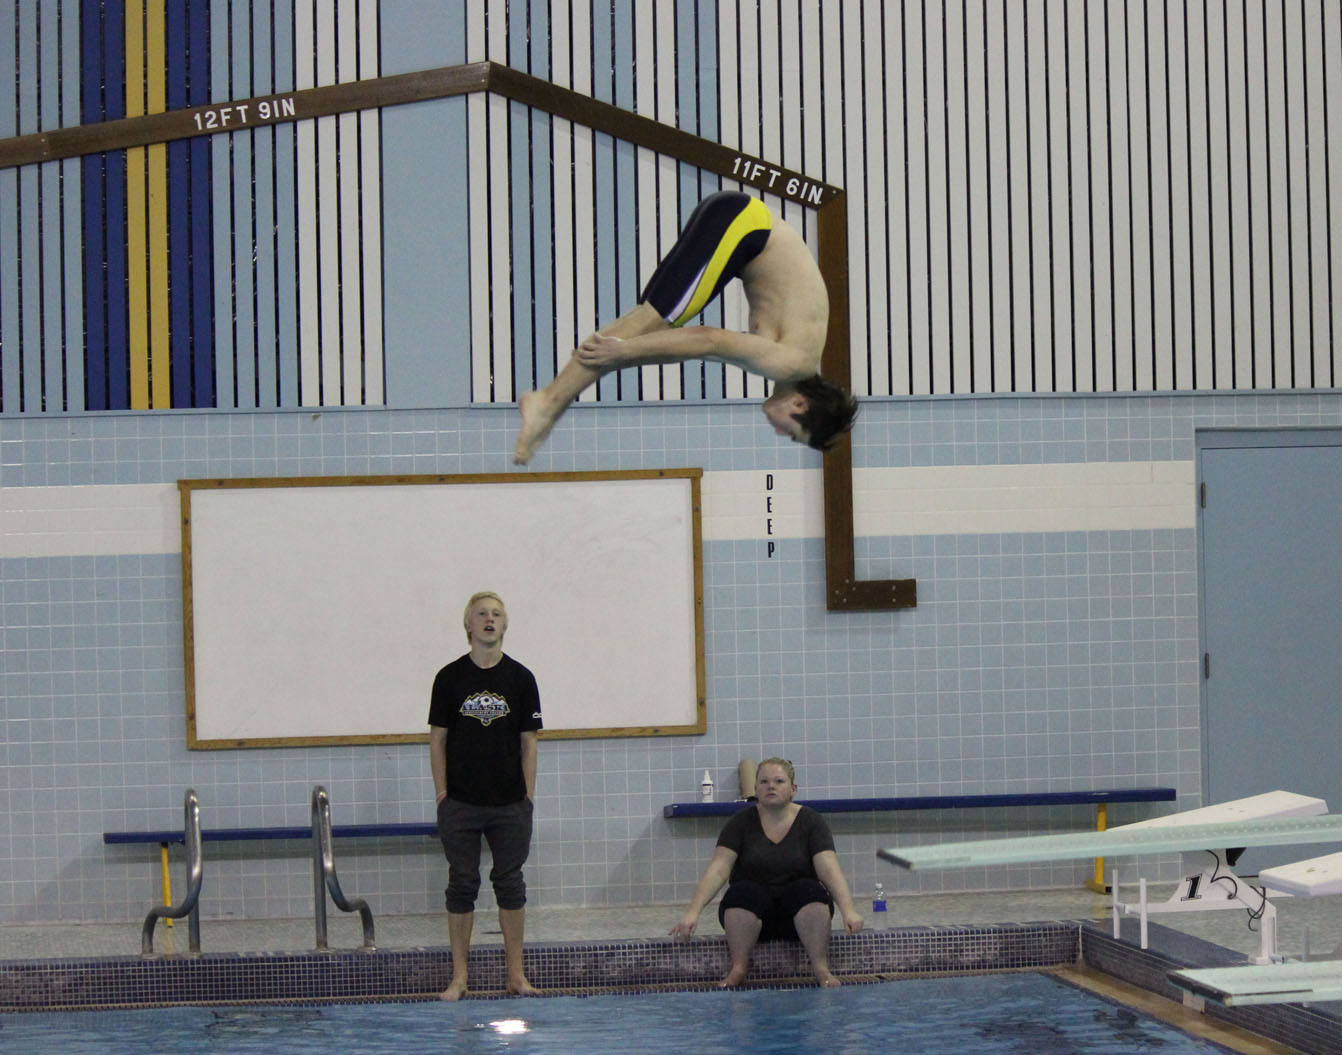 Mariner dive team members Danny Wiest, above, and Ian Hall, below, perfect their dives in preparation for Regions competition in Soldotna Oct. 30-Nov. 1.-Photos by McKibben Jackinsky, Homer News